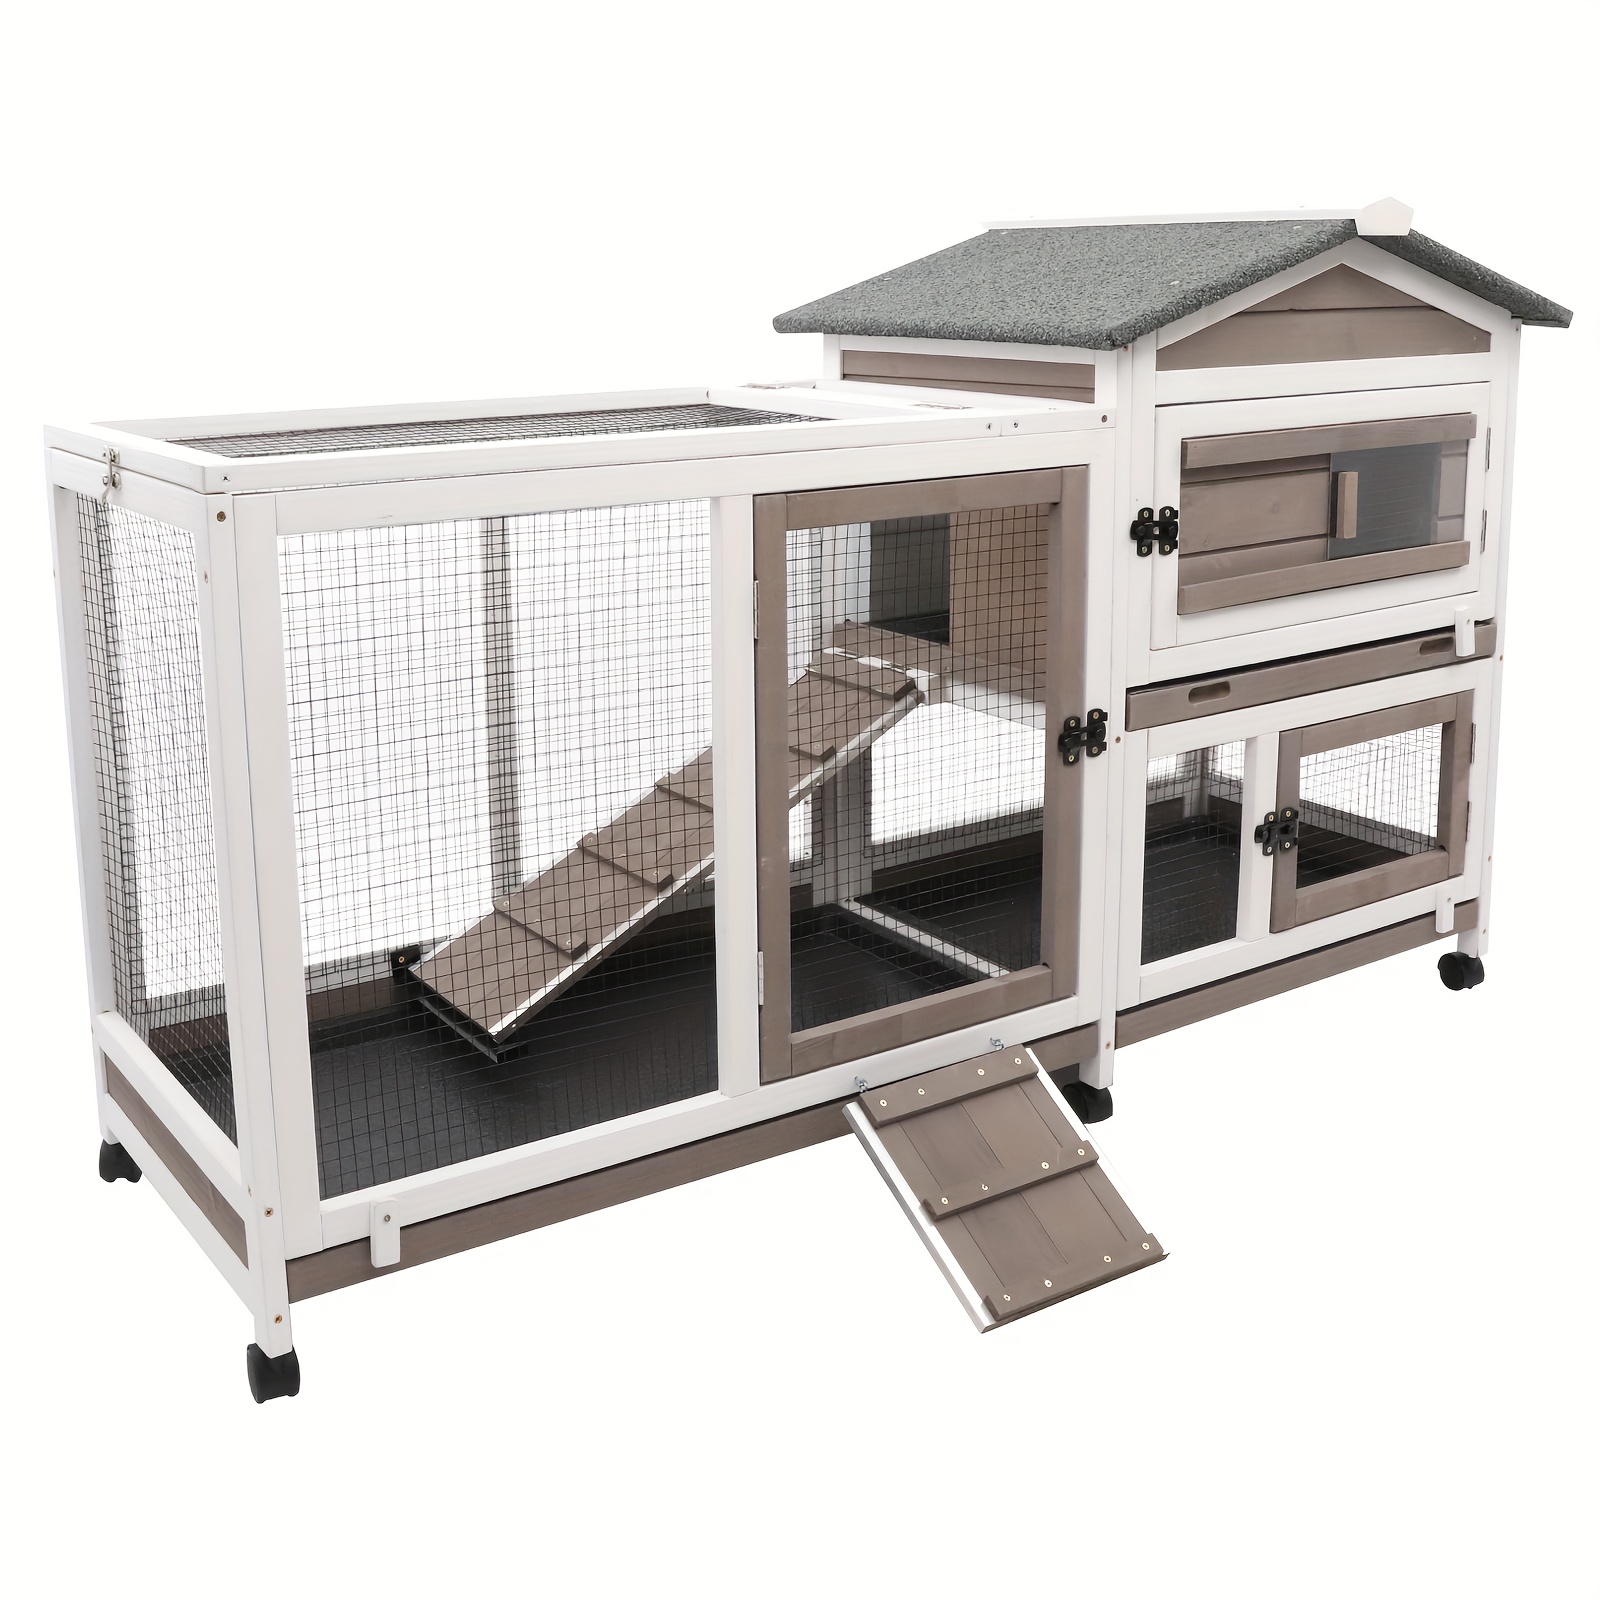 

Petscosset Rabbit Hutch Indoor Outdoor 2 Story Bunny Cage With 3 No Leak Trays, 55.31"l Guinea Pig Cages Rabbit Cage With 6 Wheels For Guinea Pig, Rabbit, Hamster, Chicks(white/grey)